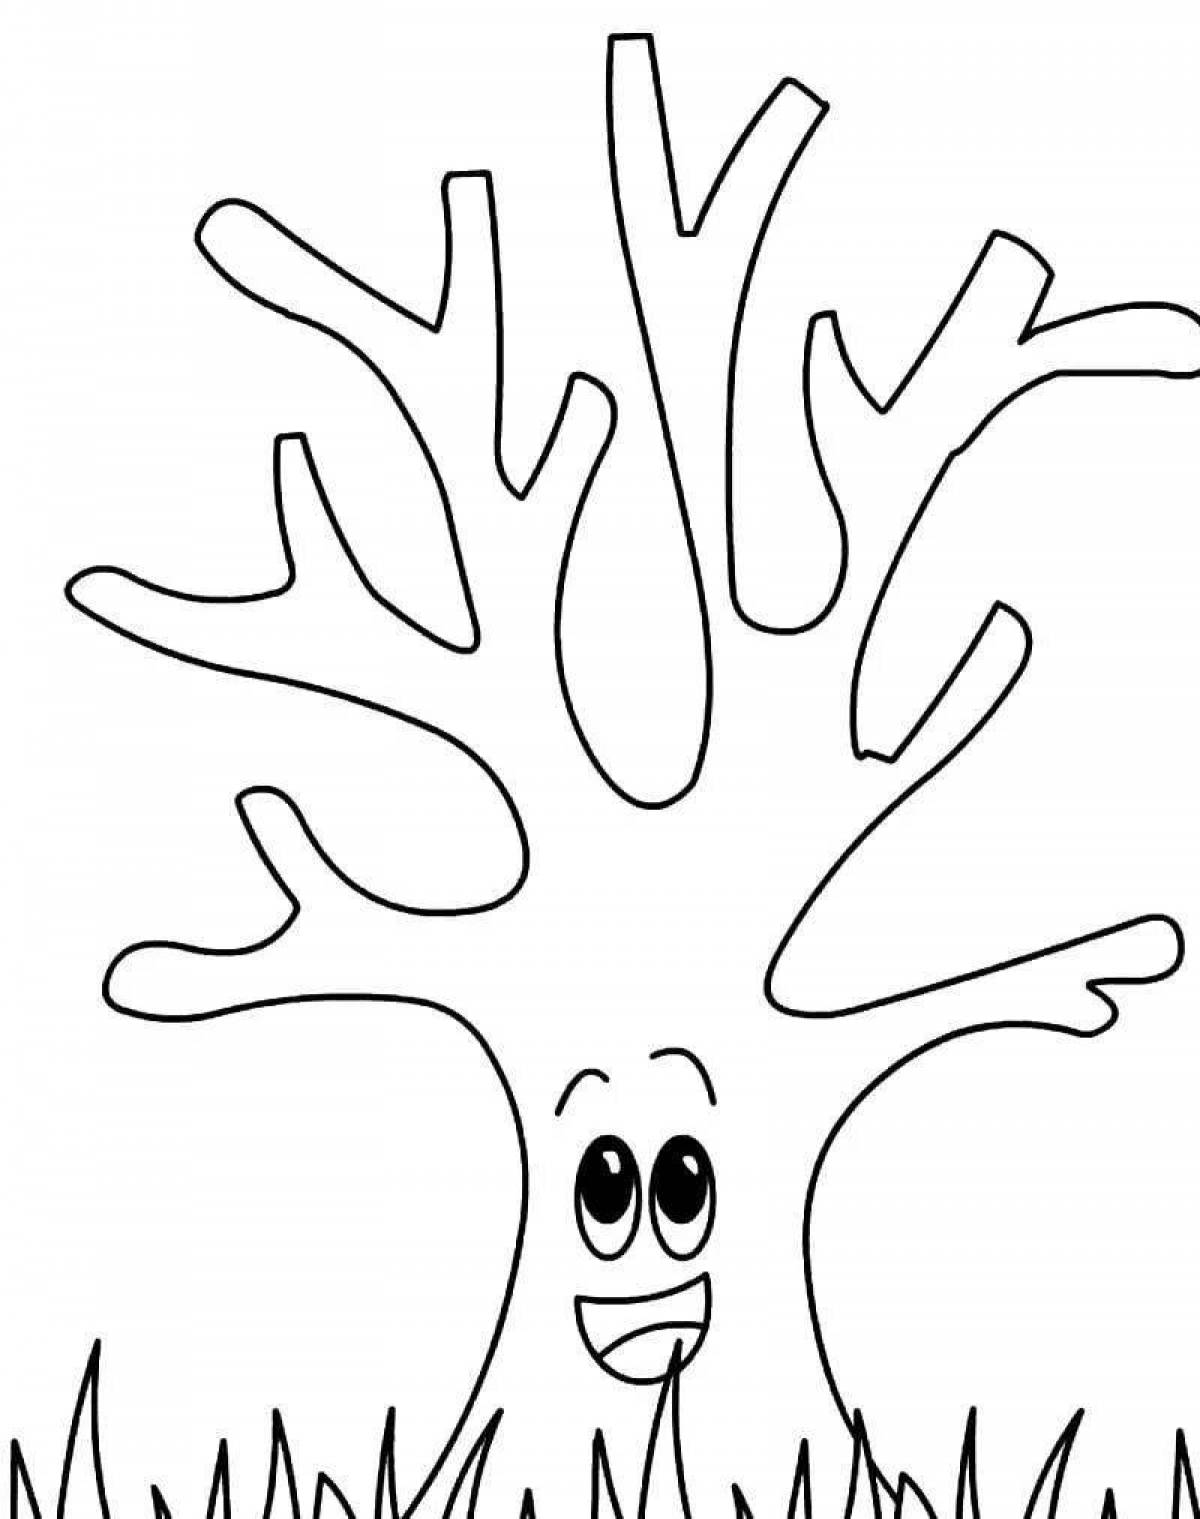 Tree trunk coloring pages for kids